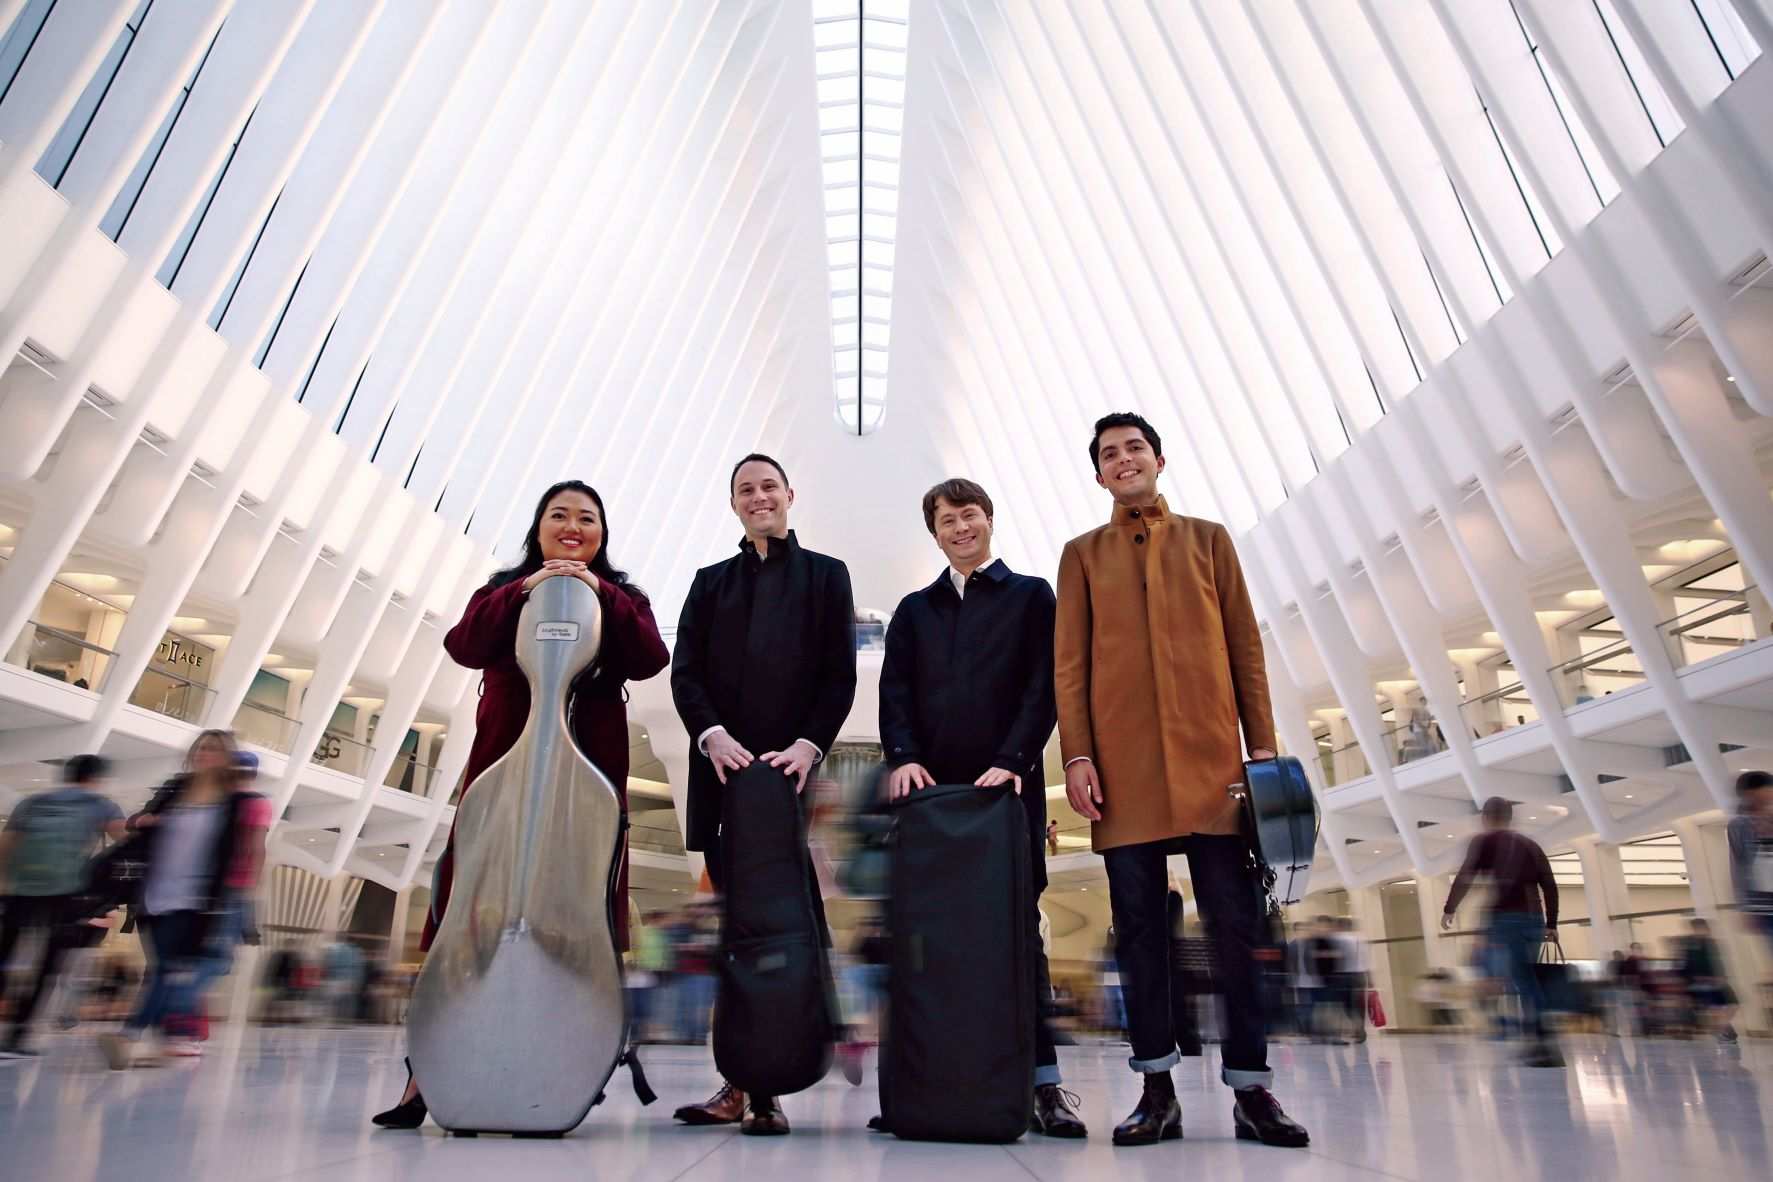 Members of the Calidore String Quartet pose with their instrument cases inside the Oculus in New York City.